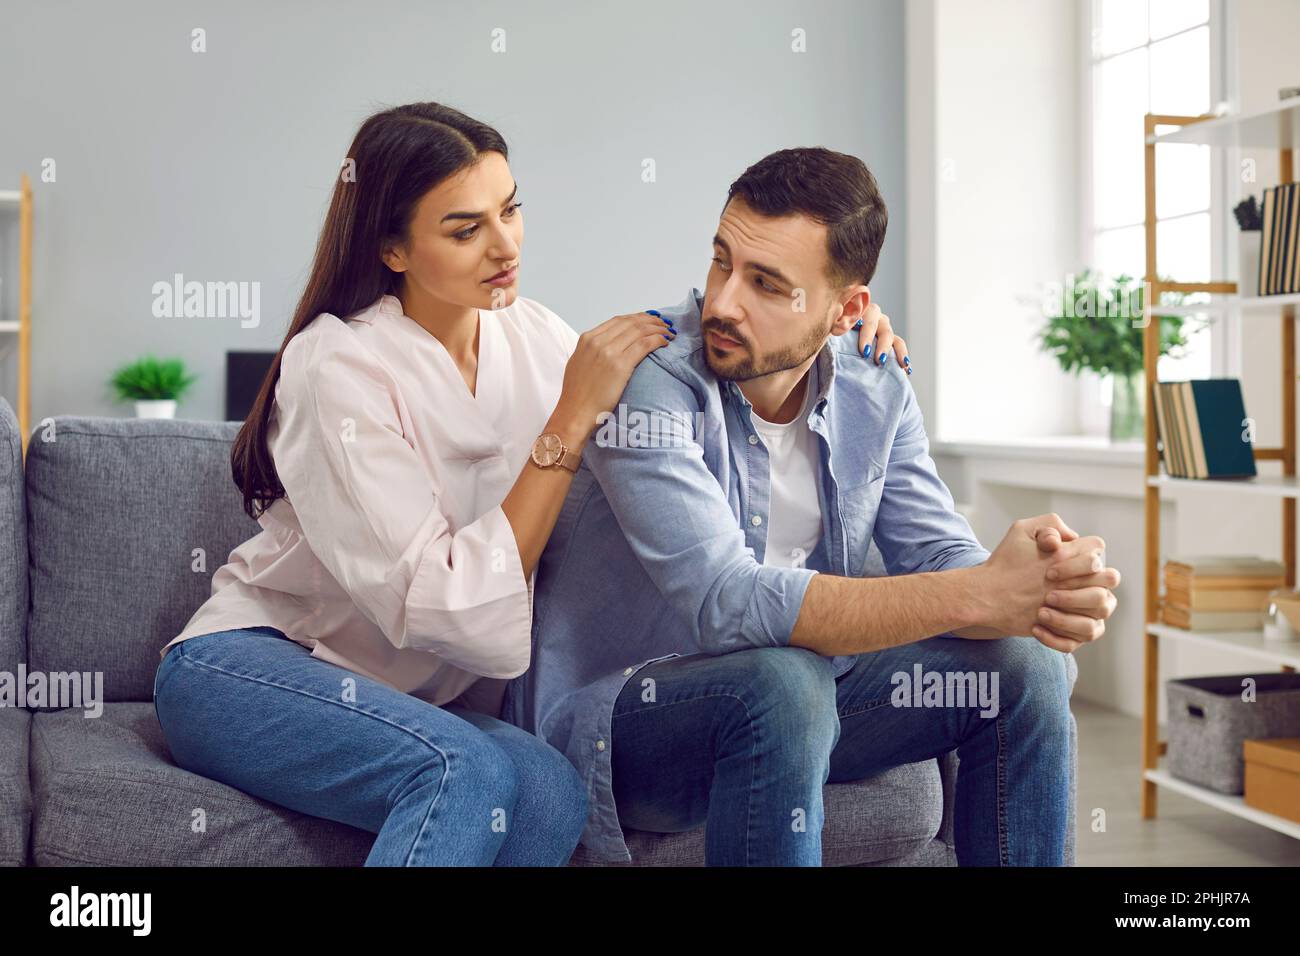 Attractive wife hugging husband from back to comfort or apologize Stock Photo